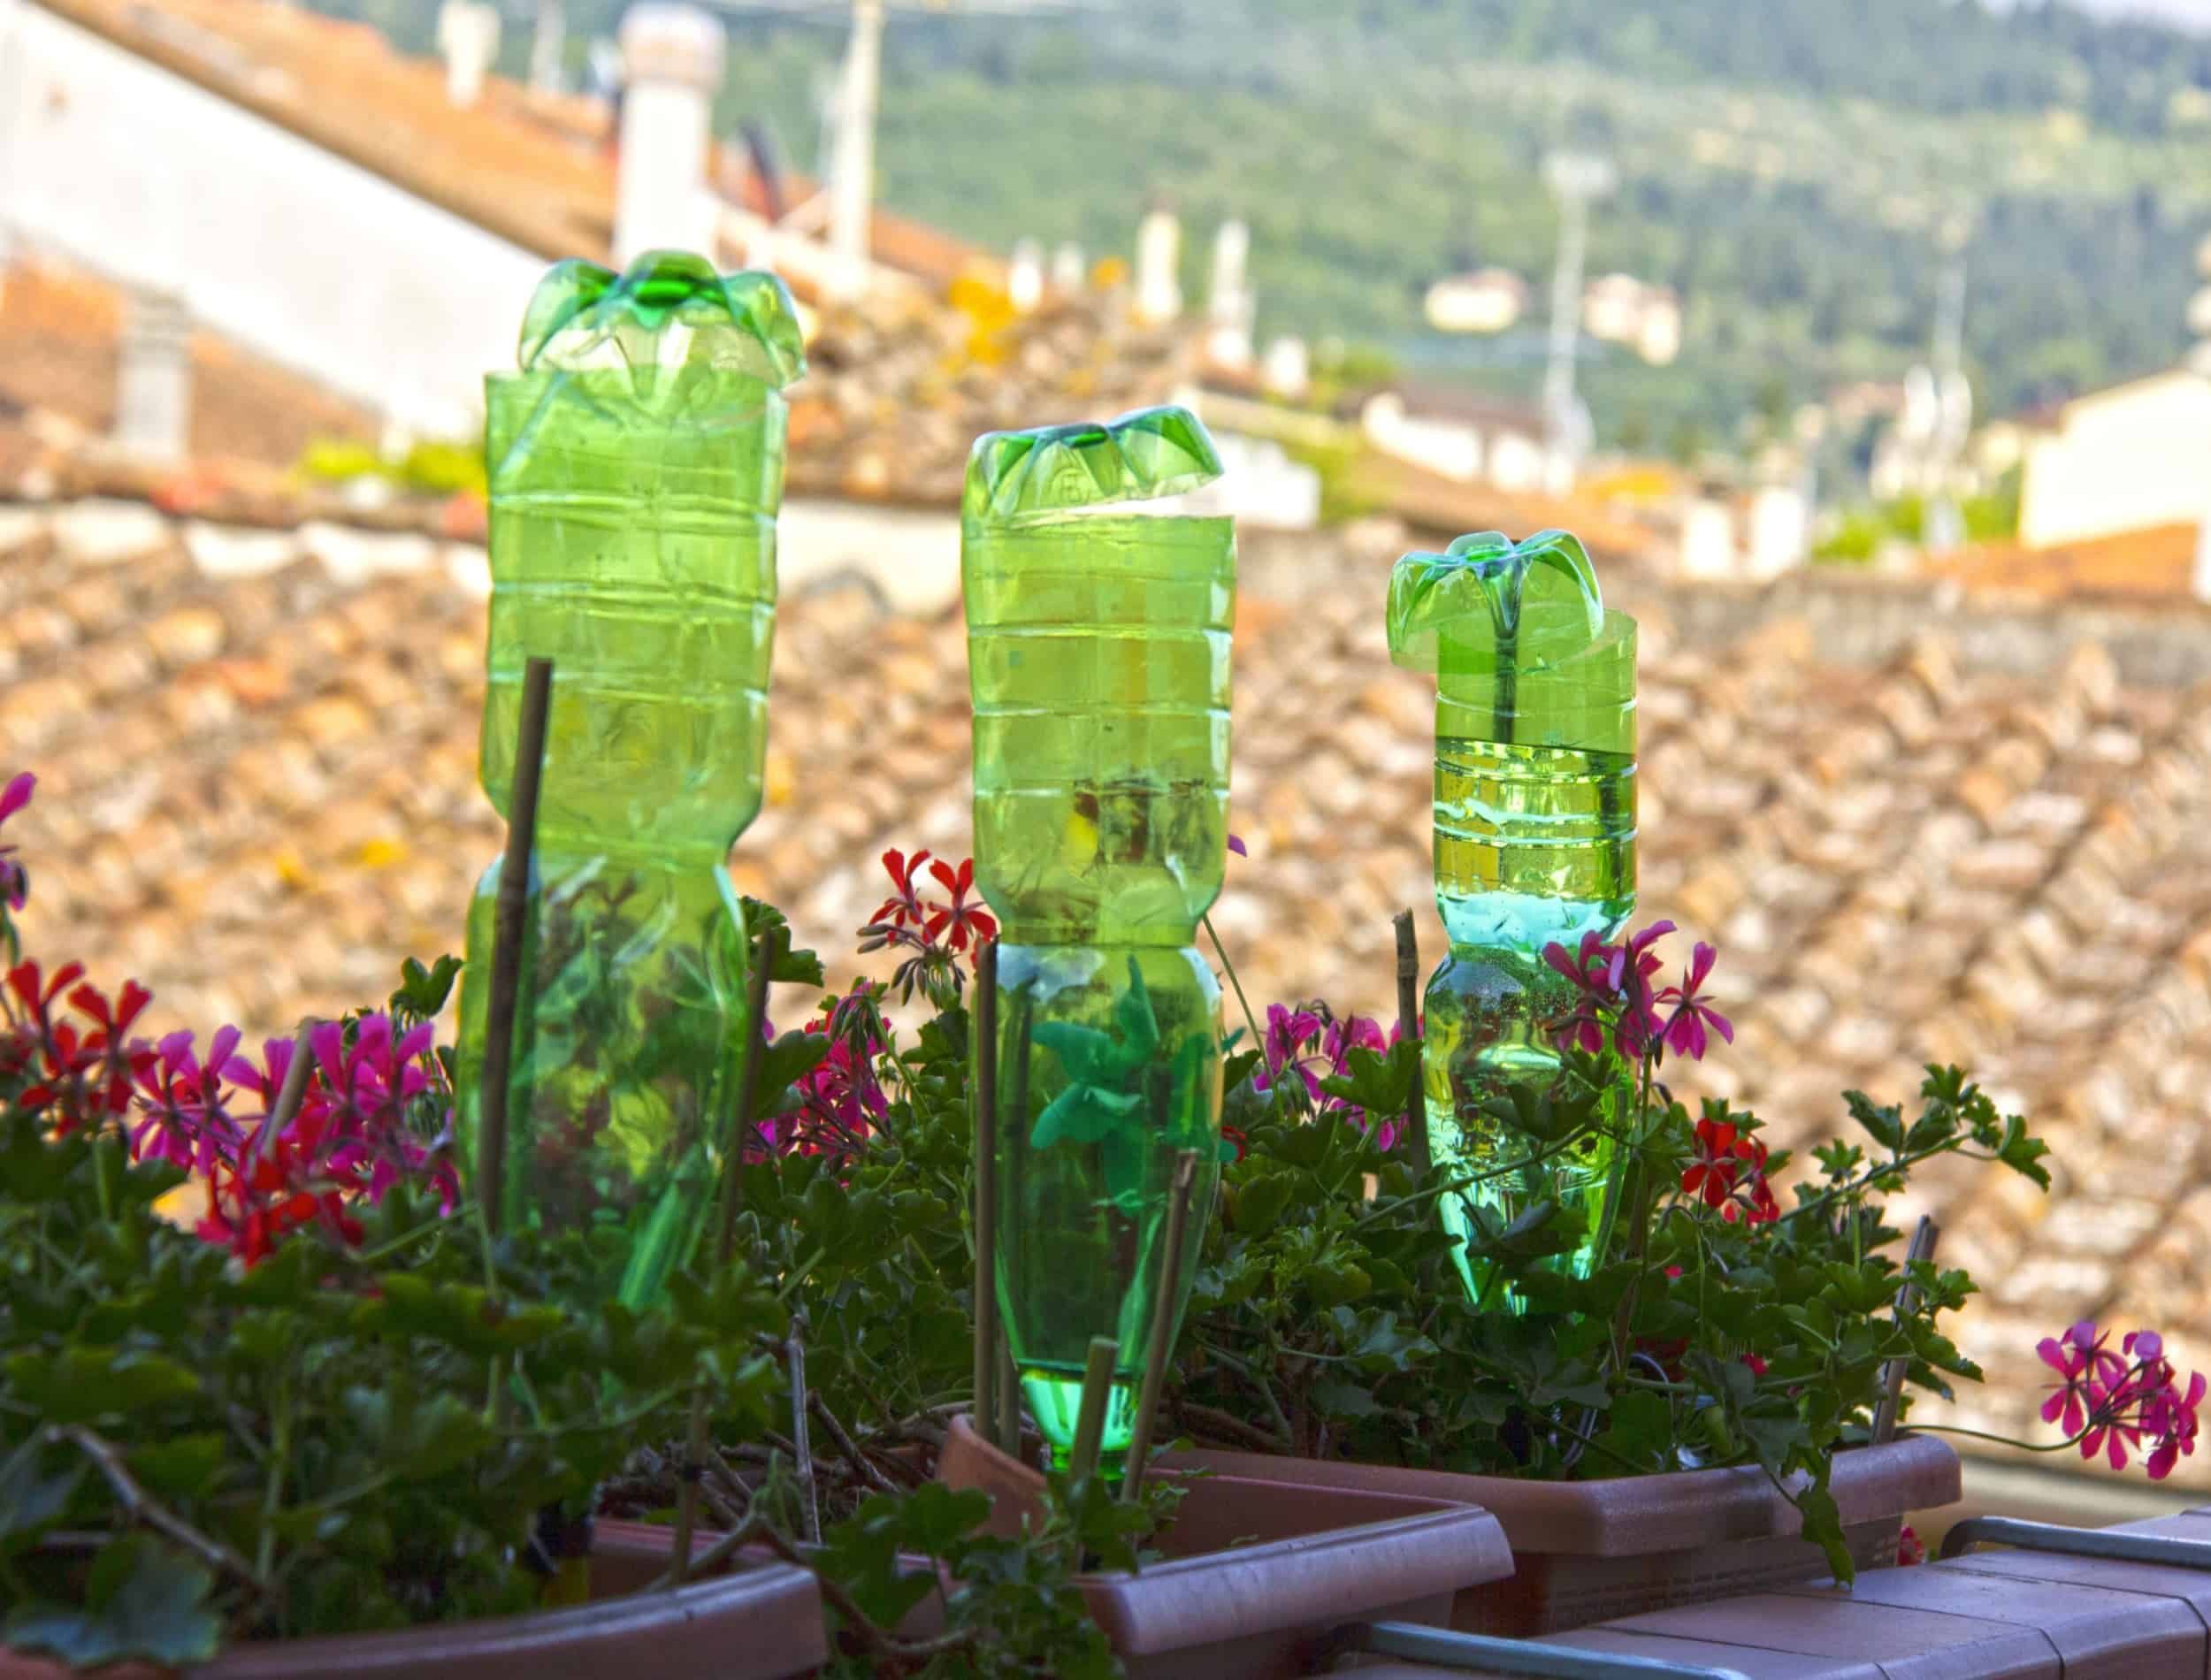 plastic bottles for watering flowers on the balcony as irrigation system